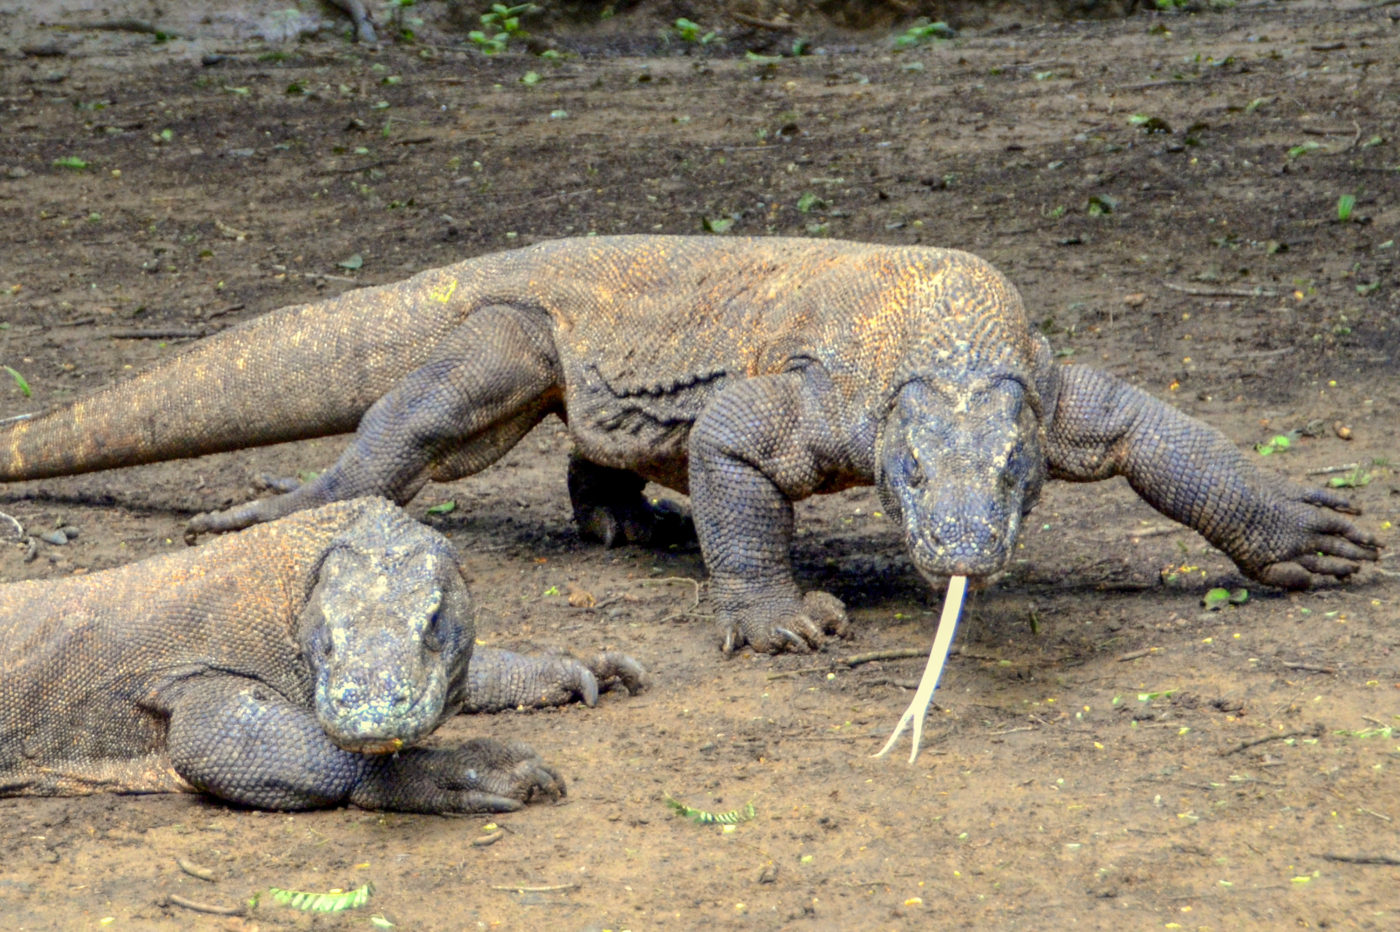 Exotic Komodo Dragons Indonesia Tour, Seeing the Largest Reptiles on Earth